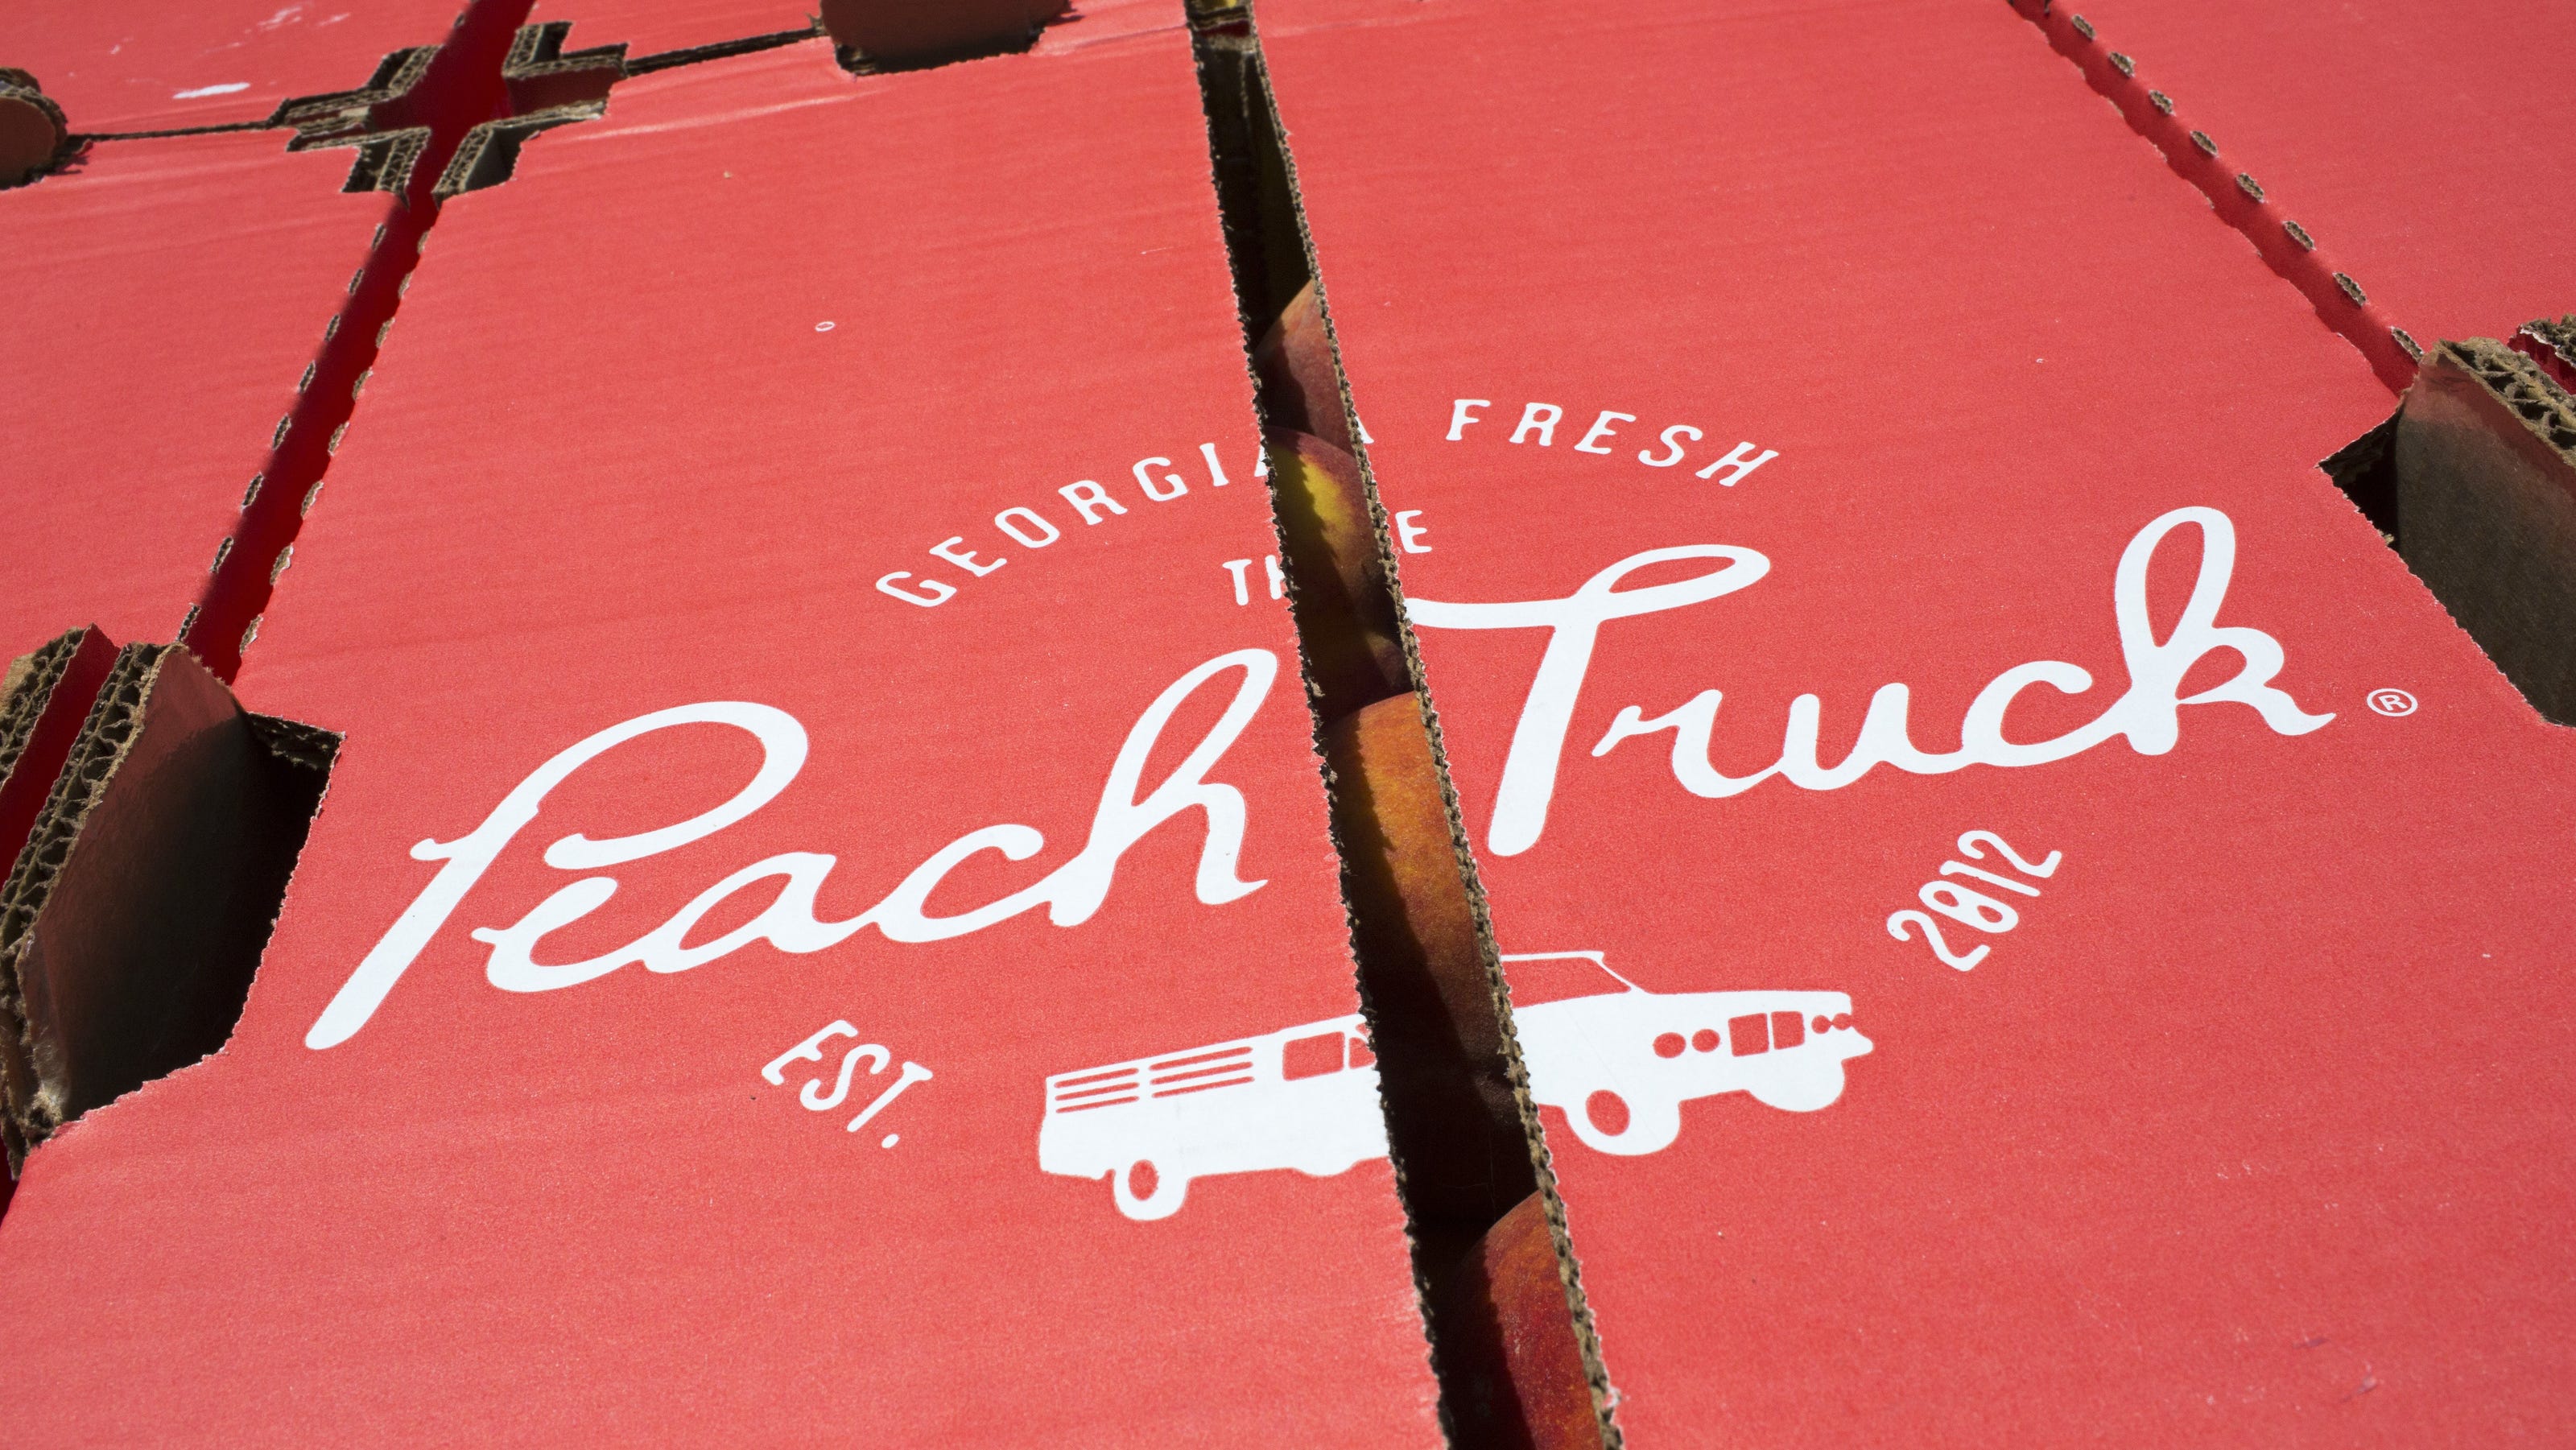 When will the Peach Truck Tour come to Columbus?